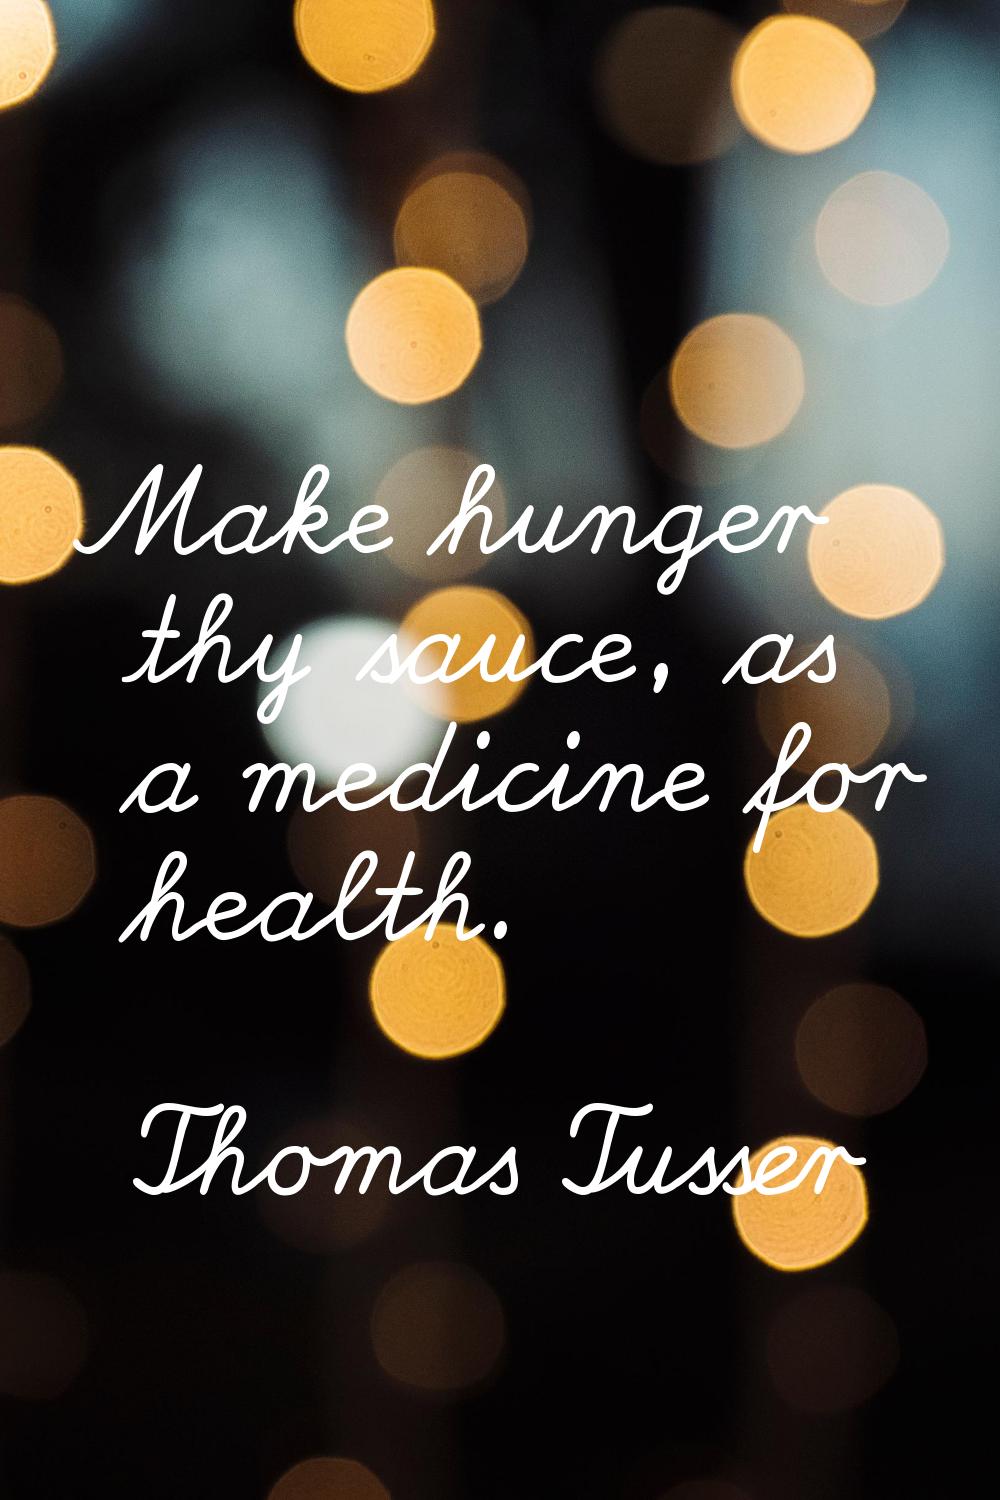 Make hunger thy sauce, as a medicine for health.